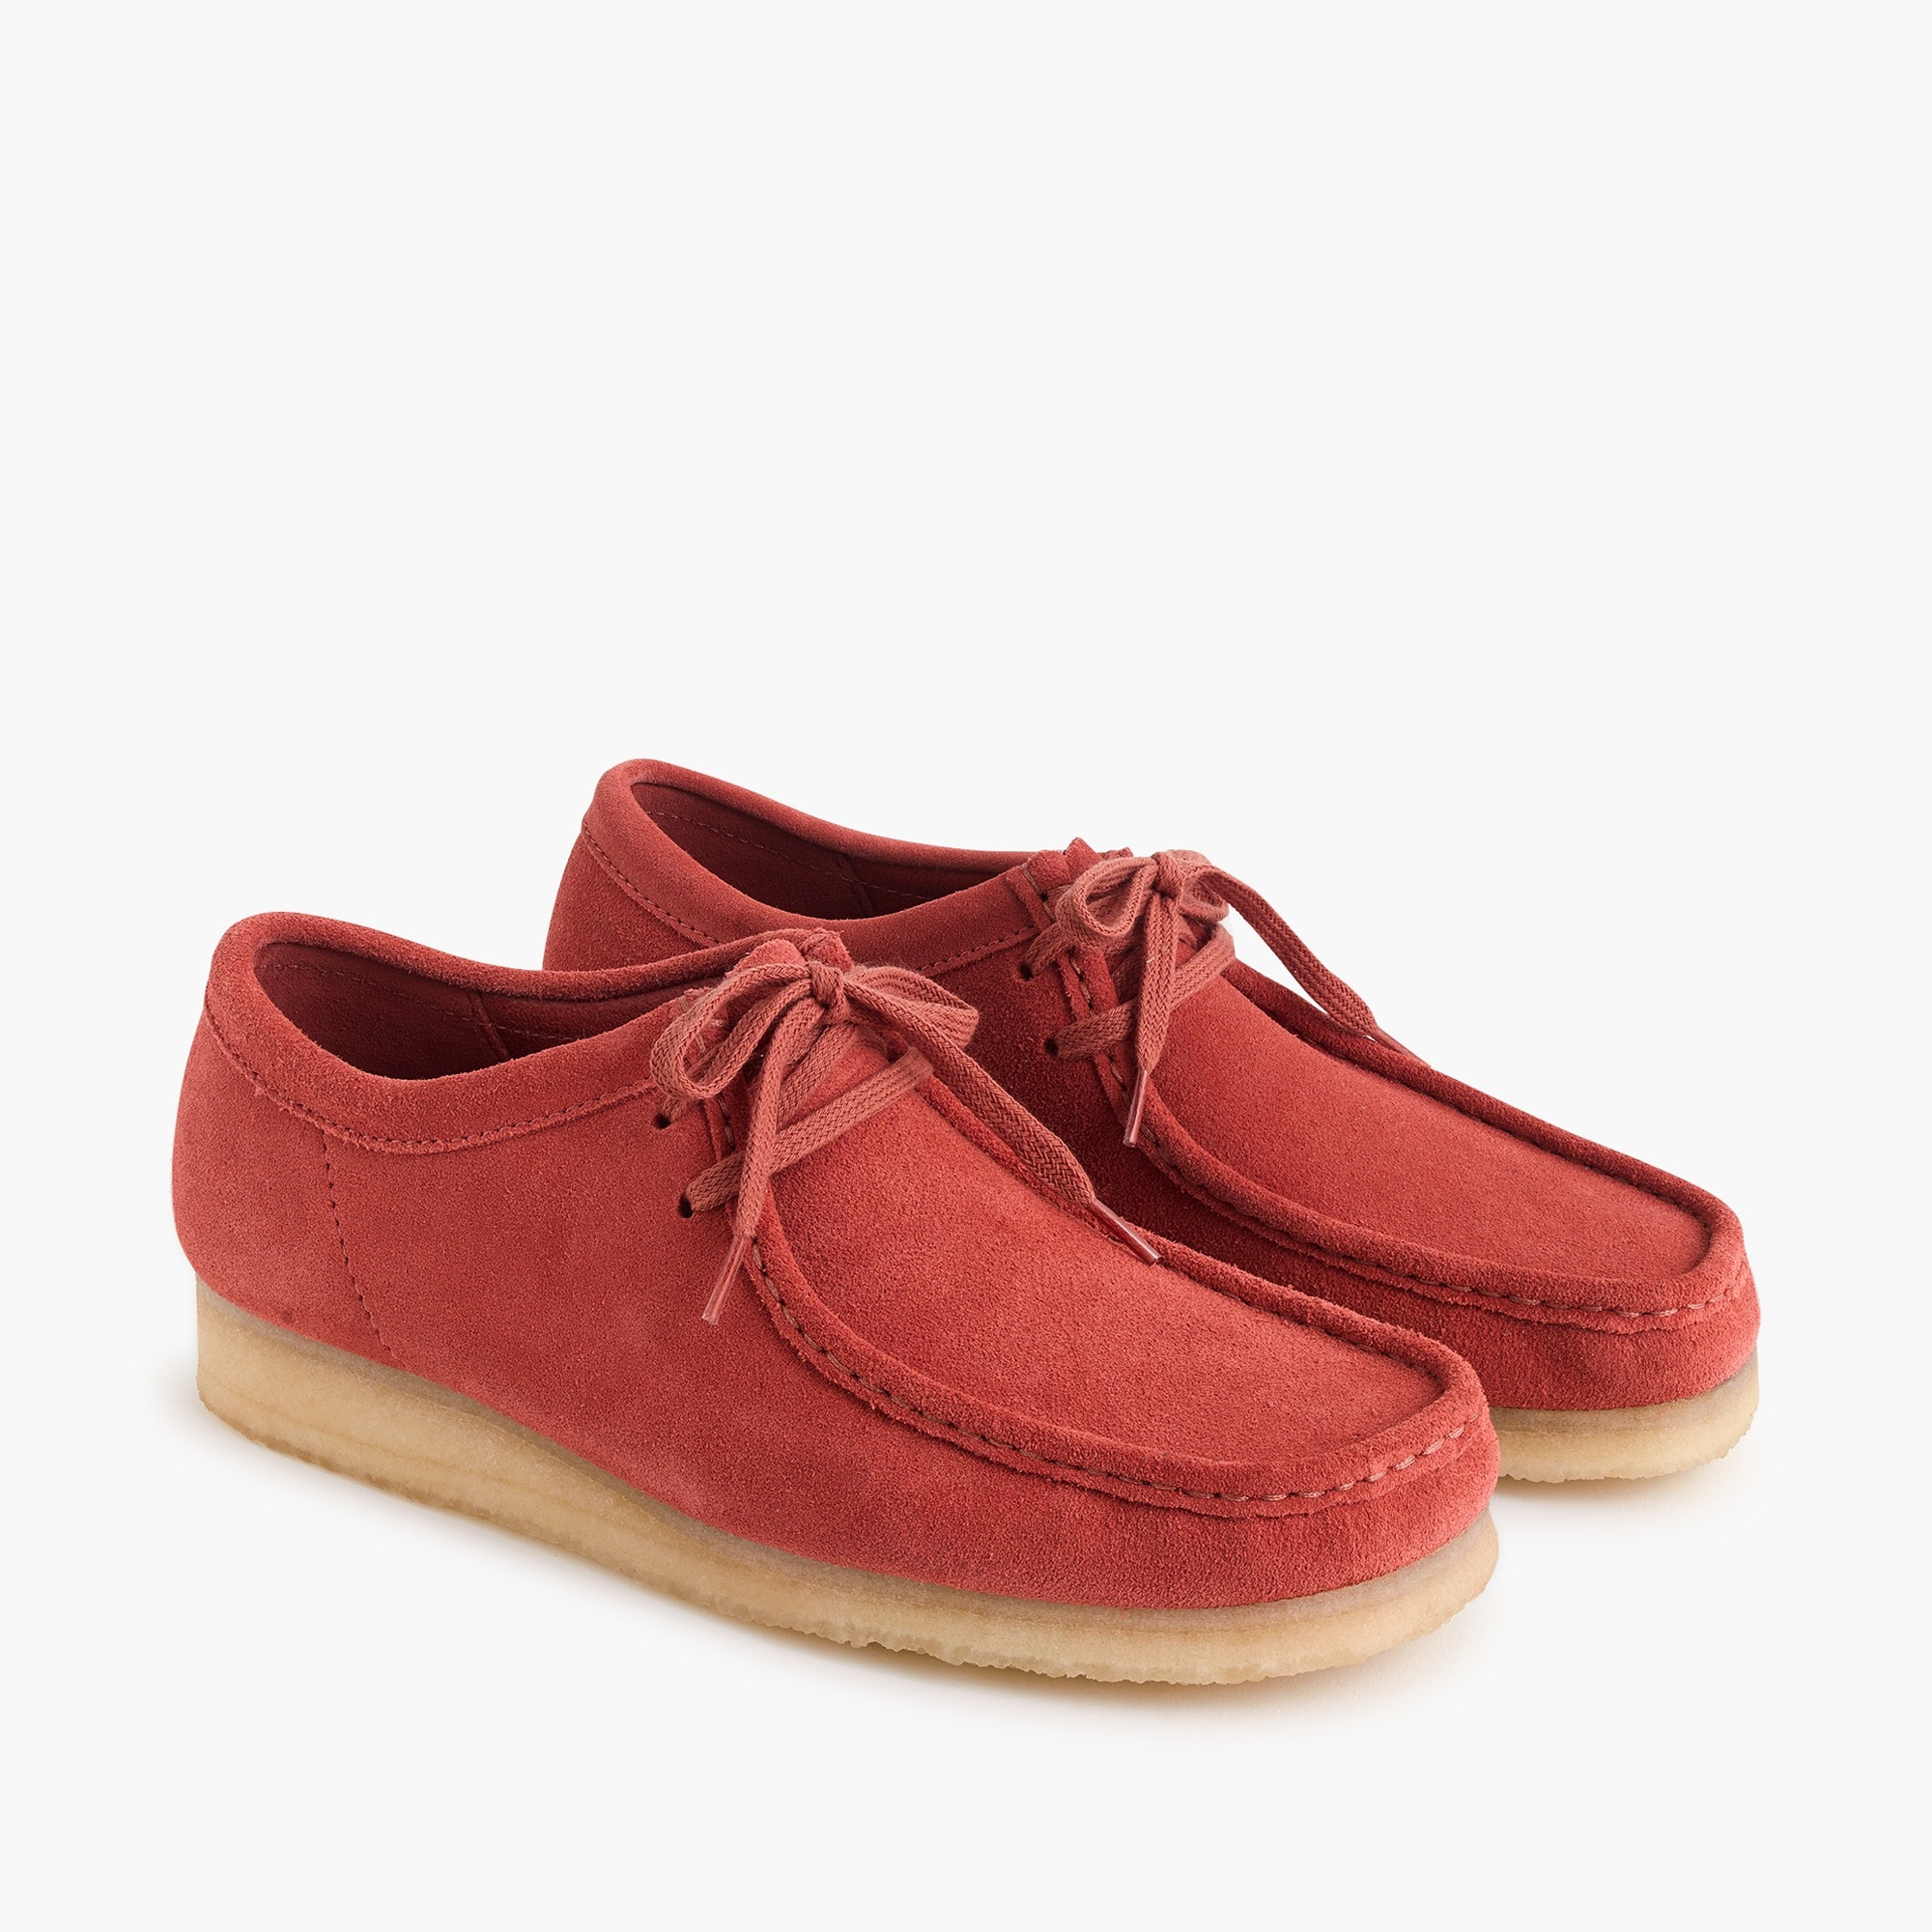 clarks suede slippers